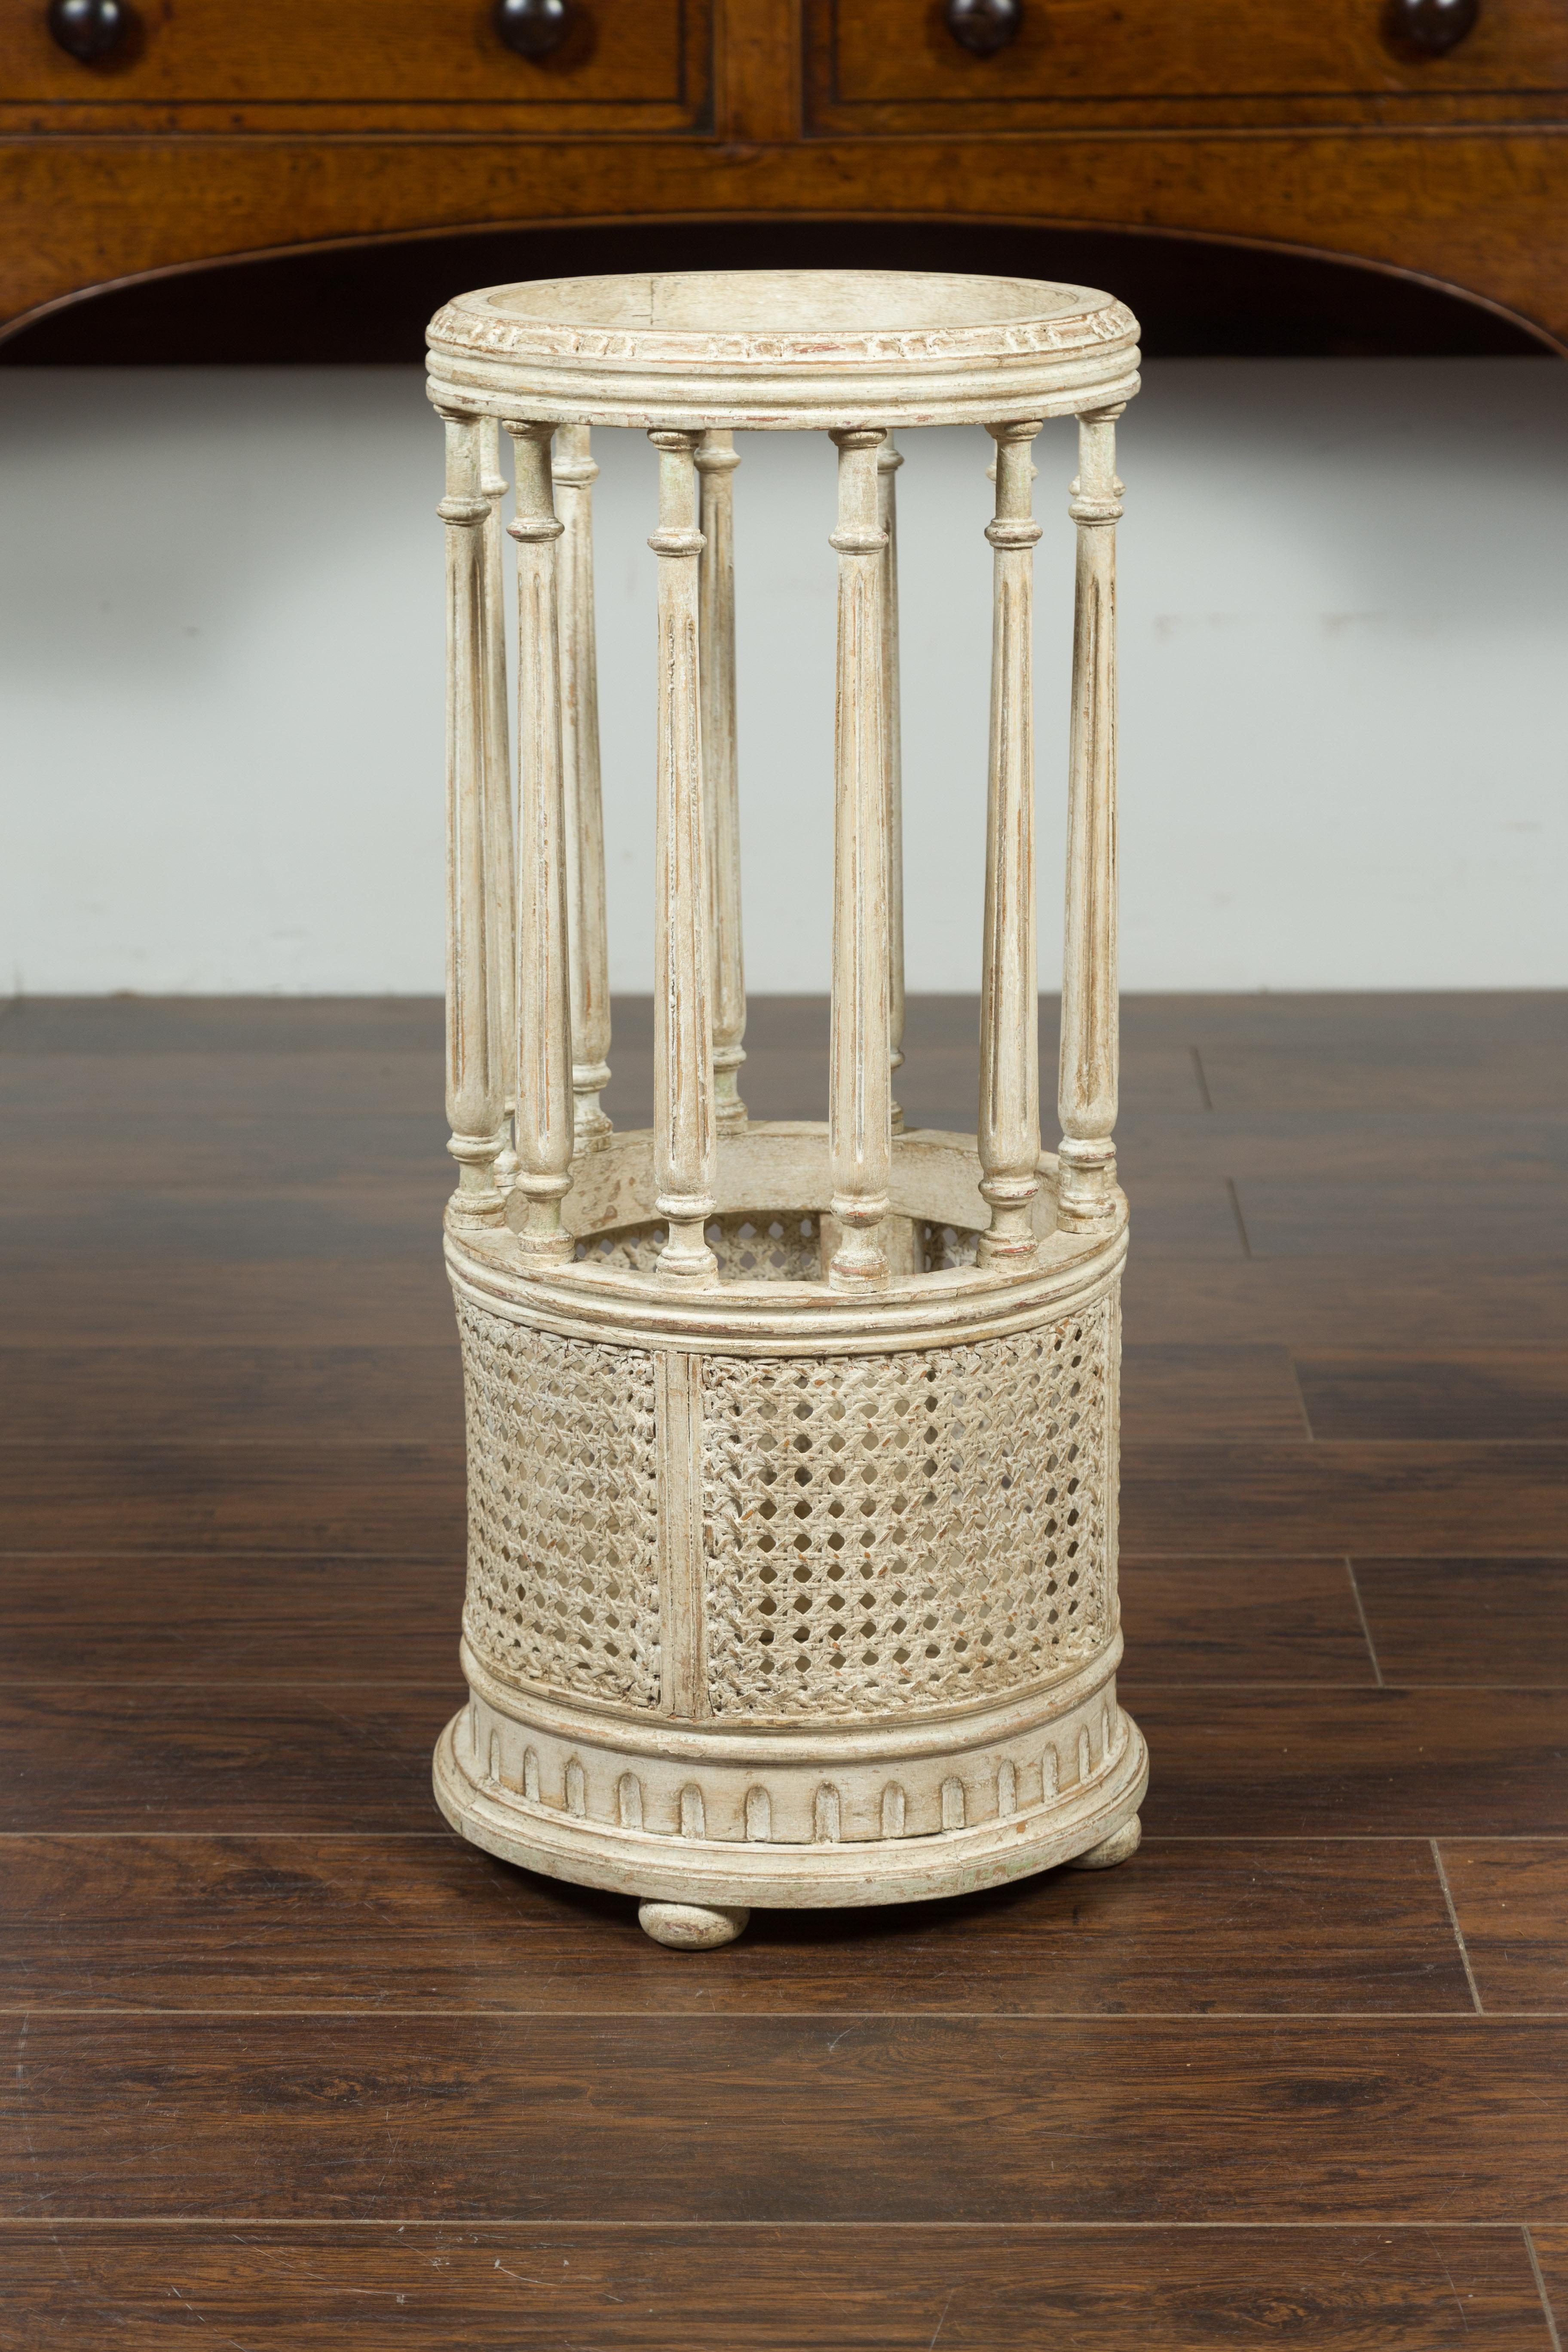 A French carved and painted wood and cane umbrella stand from the early 20th century, with fluted columns and bun feet. Created in France during the Années Folles (the Roaring Twenties), this painted umbrella stand features a circular top supported